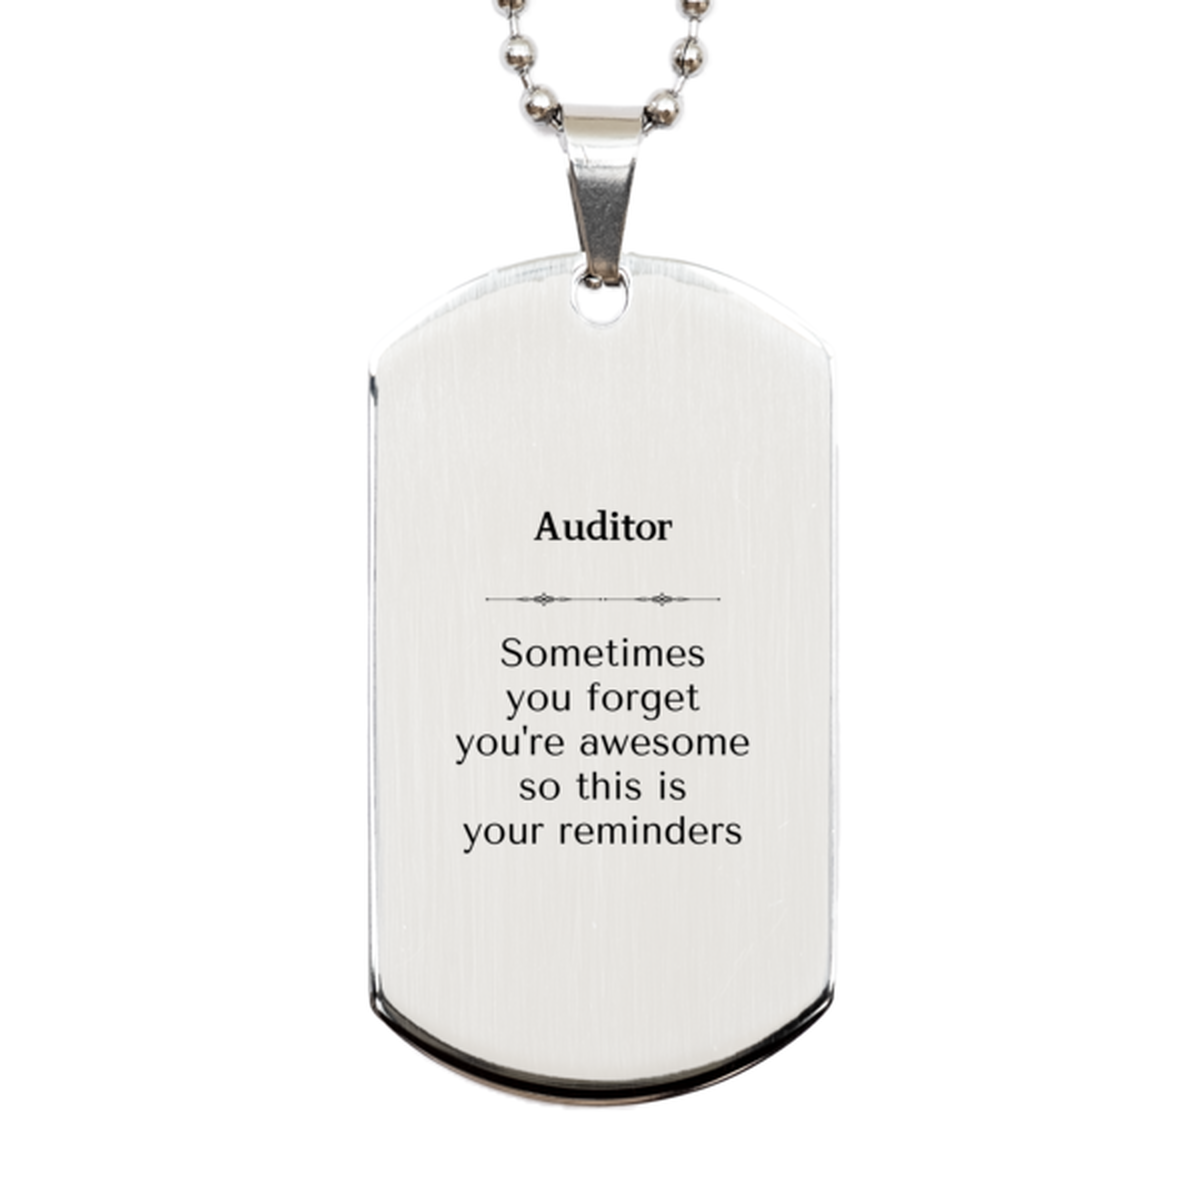 Sentimental Auditor Silver Dog Tag, Auditor Sometimes you forget you're awesome so this is your reminders, Graduation Christmas Birthday Gifts for Auditor, Men, Women, Coworkers